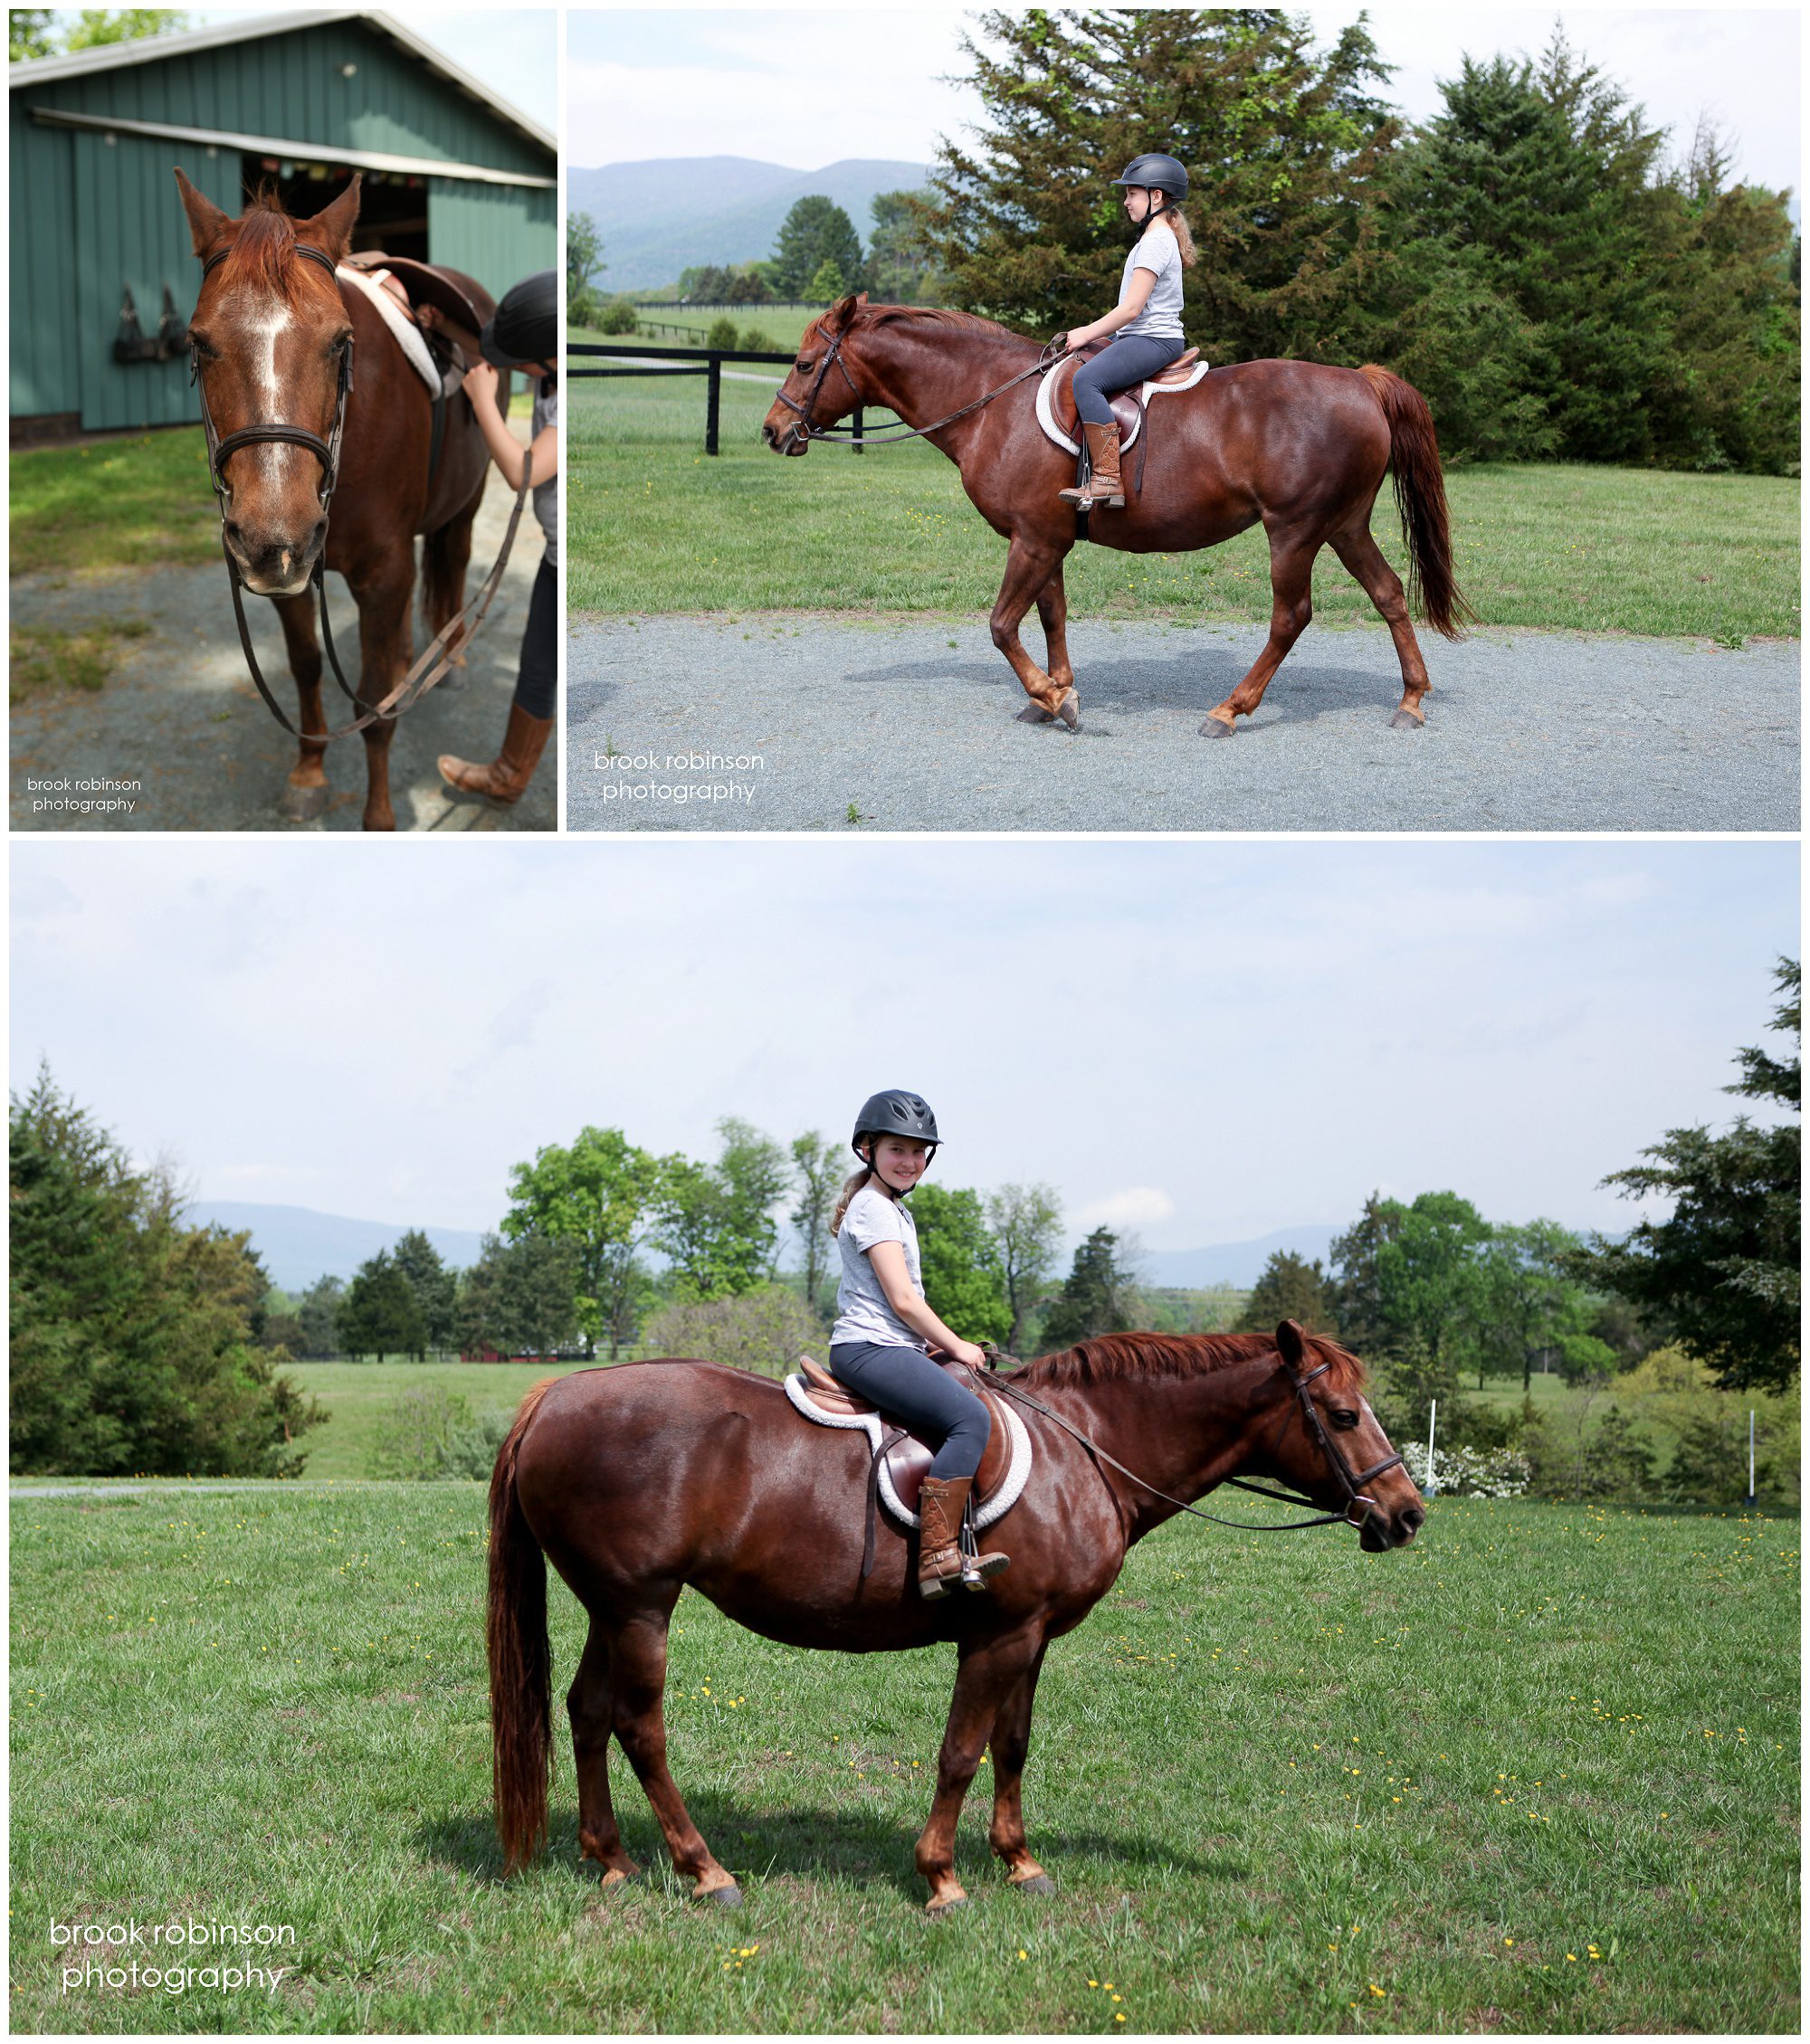 charlottesville horse photography portraits photographer horseback riding pictures lessons girls horses equine portrait pony academy alebmarle county central virginia